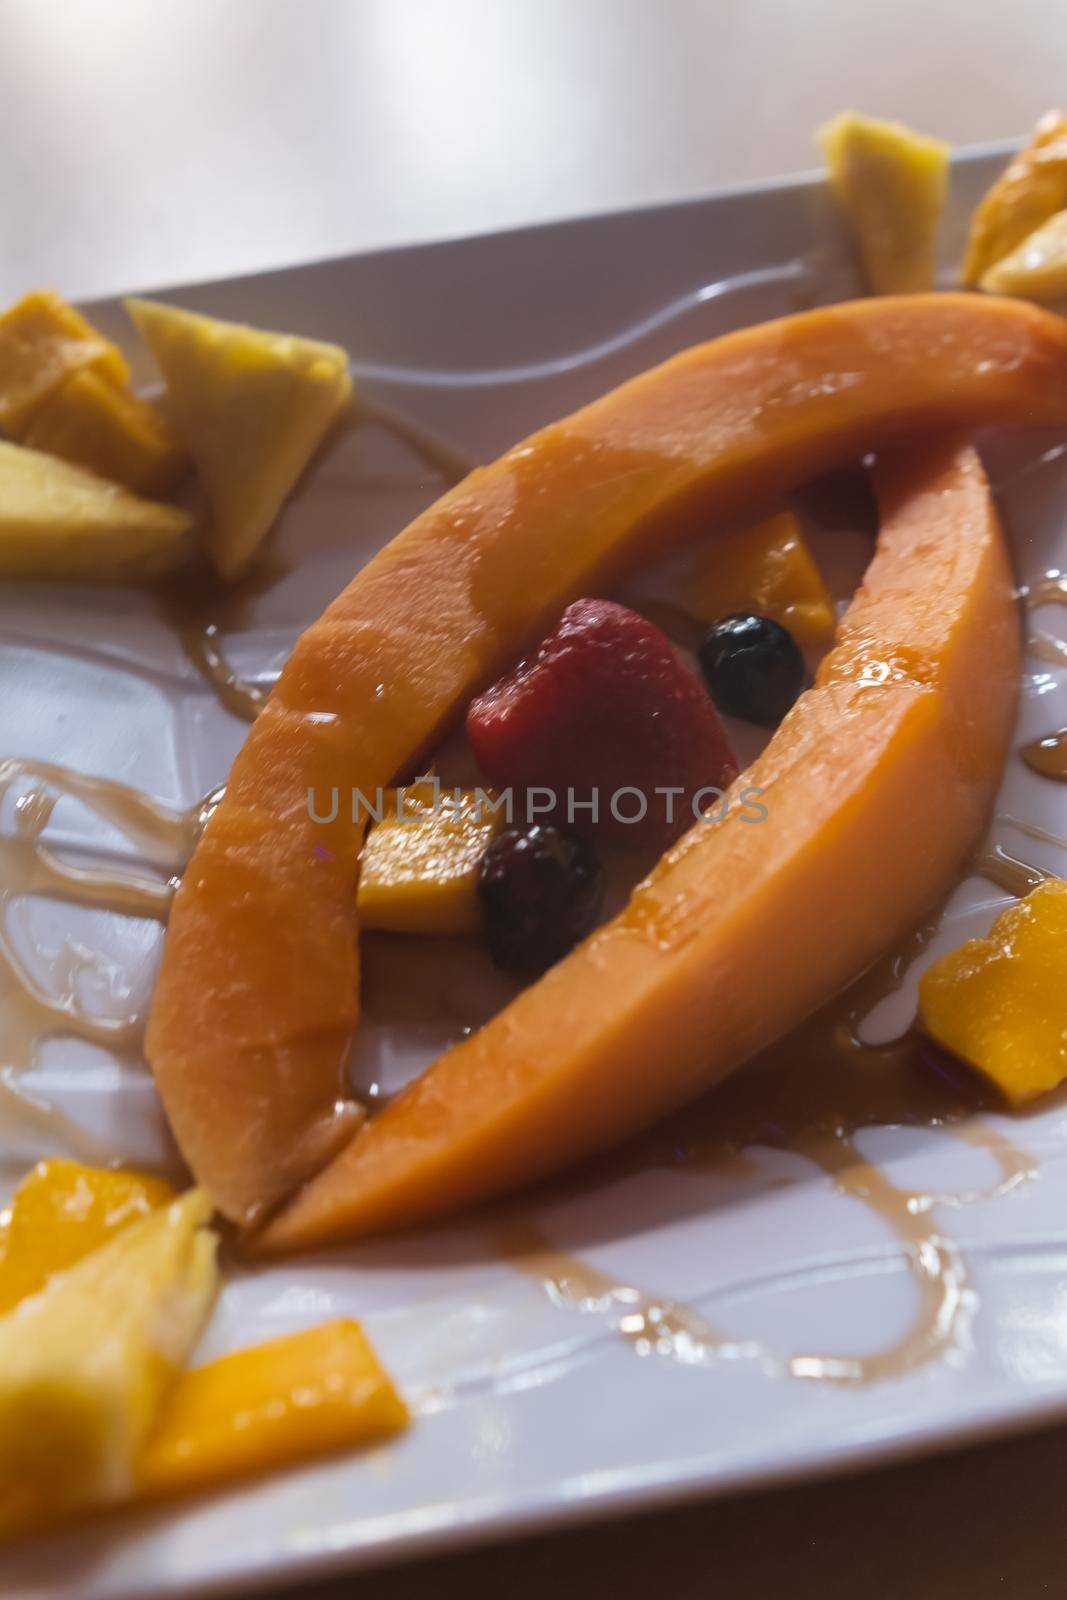 Close-up of papaya and pineapple slices, blueberries, and strawberries on white square plate. Fresh honey and delicious sliced fruit arranged on porcelain plate. Healthy food and snacks